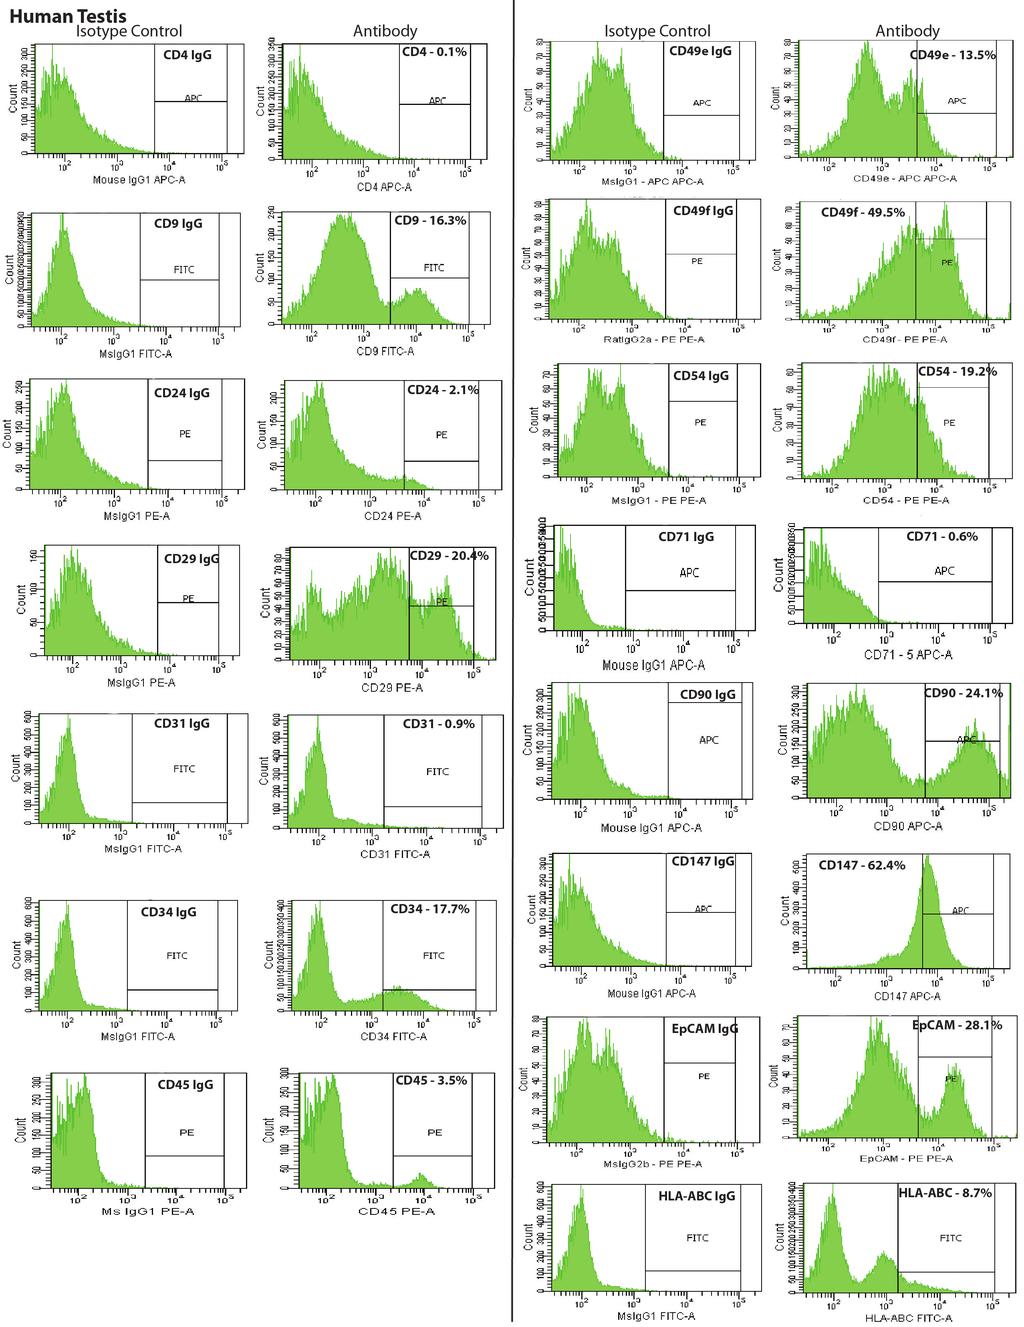 Supplemental Figure 1A: Histograms from flow cytometry demonstrating the percentage of human testicular cells that stained positively for